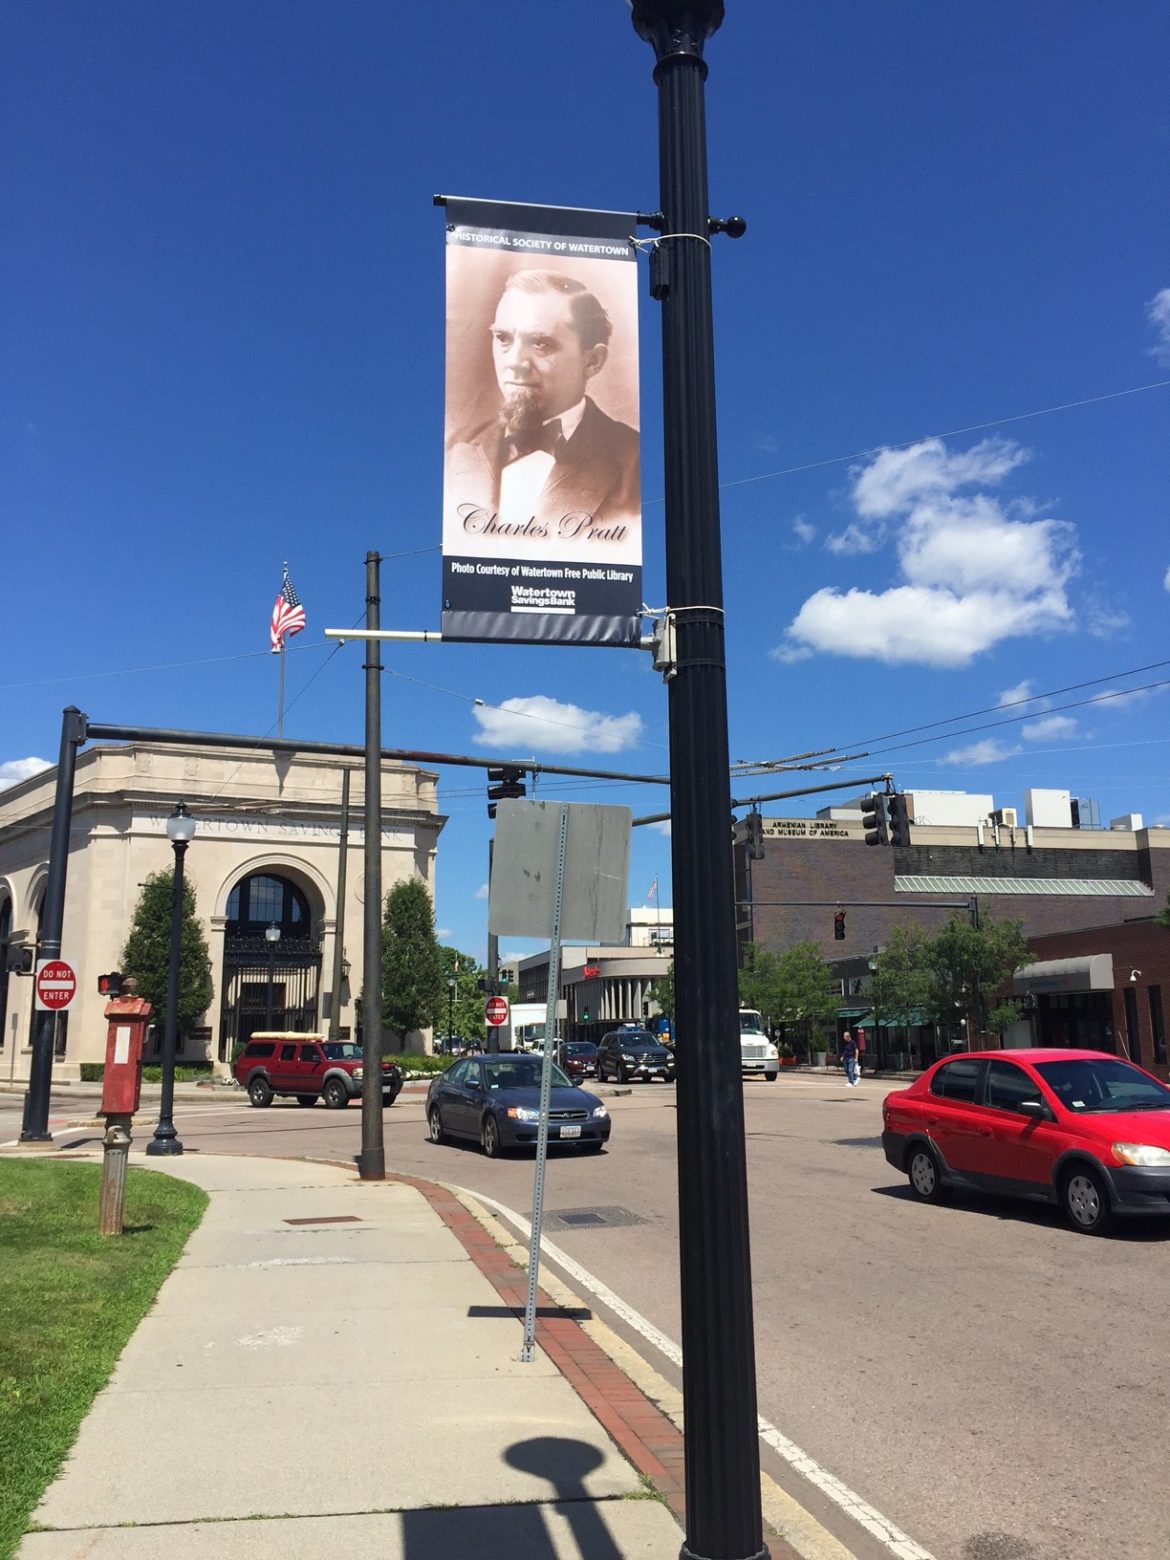 One of the new banners, this one featuring Charles Pratt, celebrating historical figures who lived in Watertown.